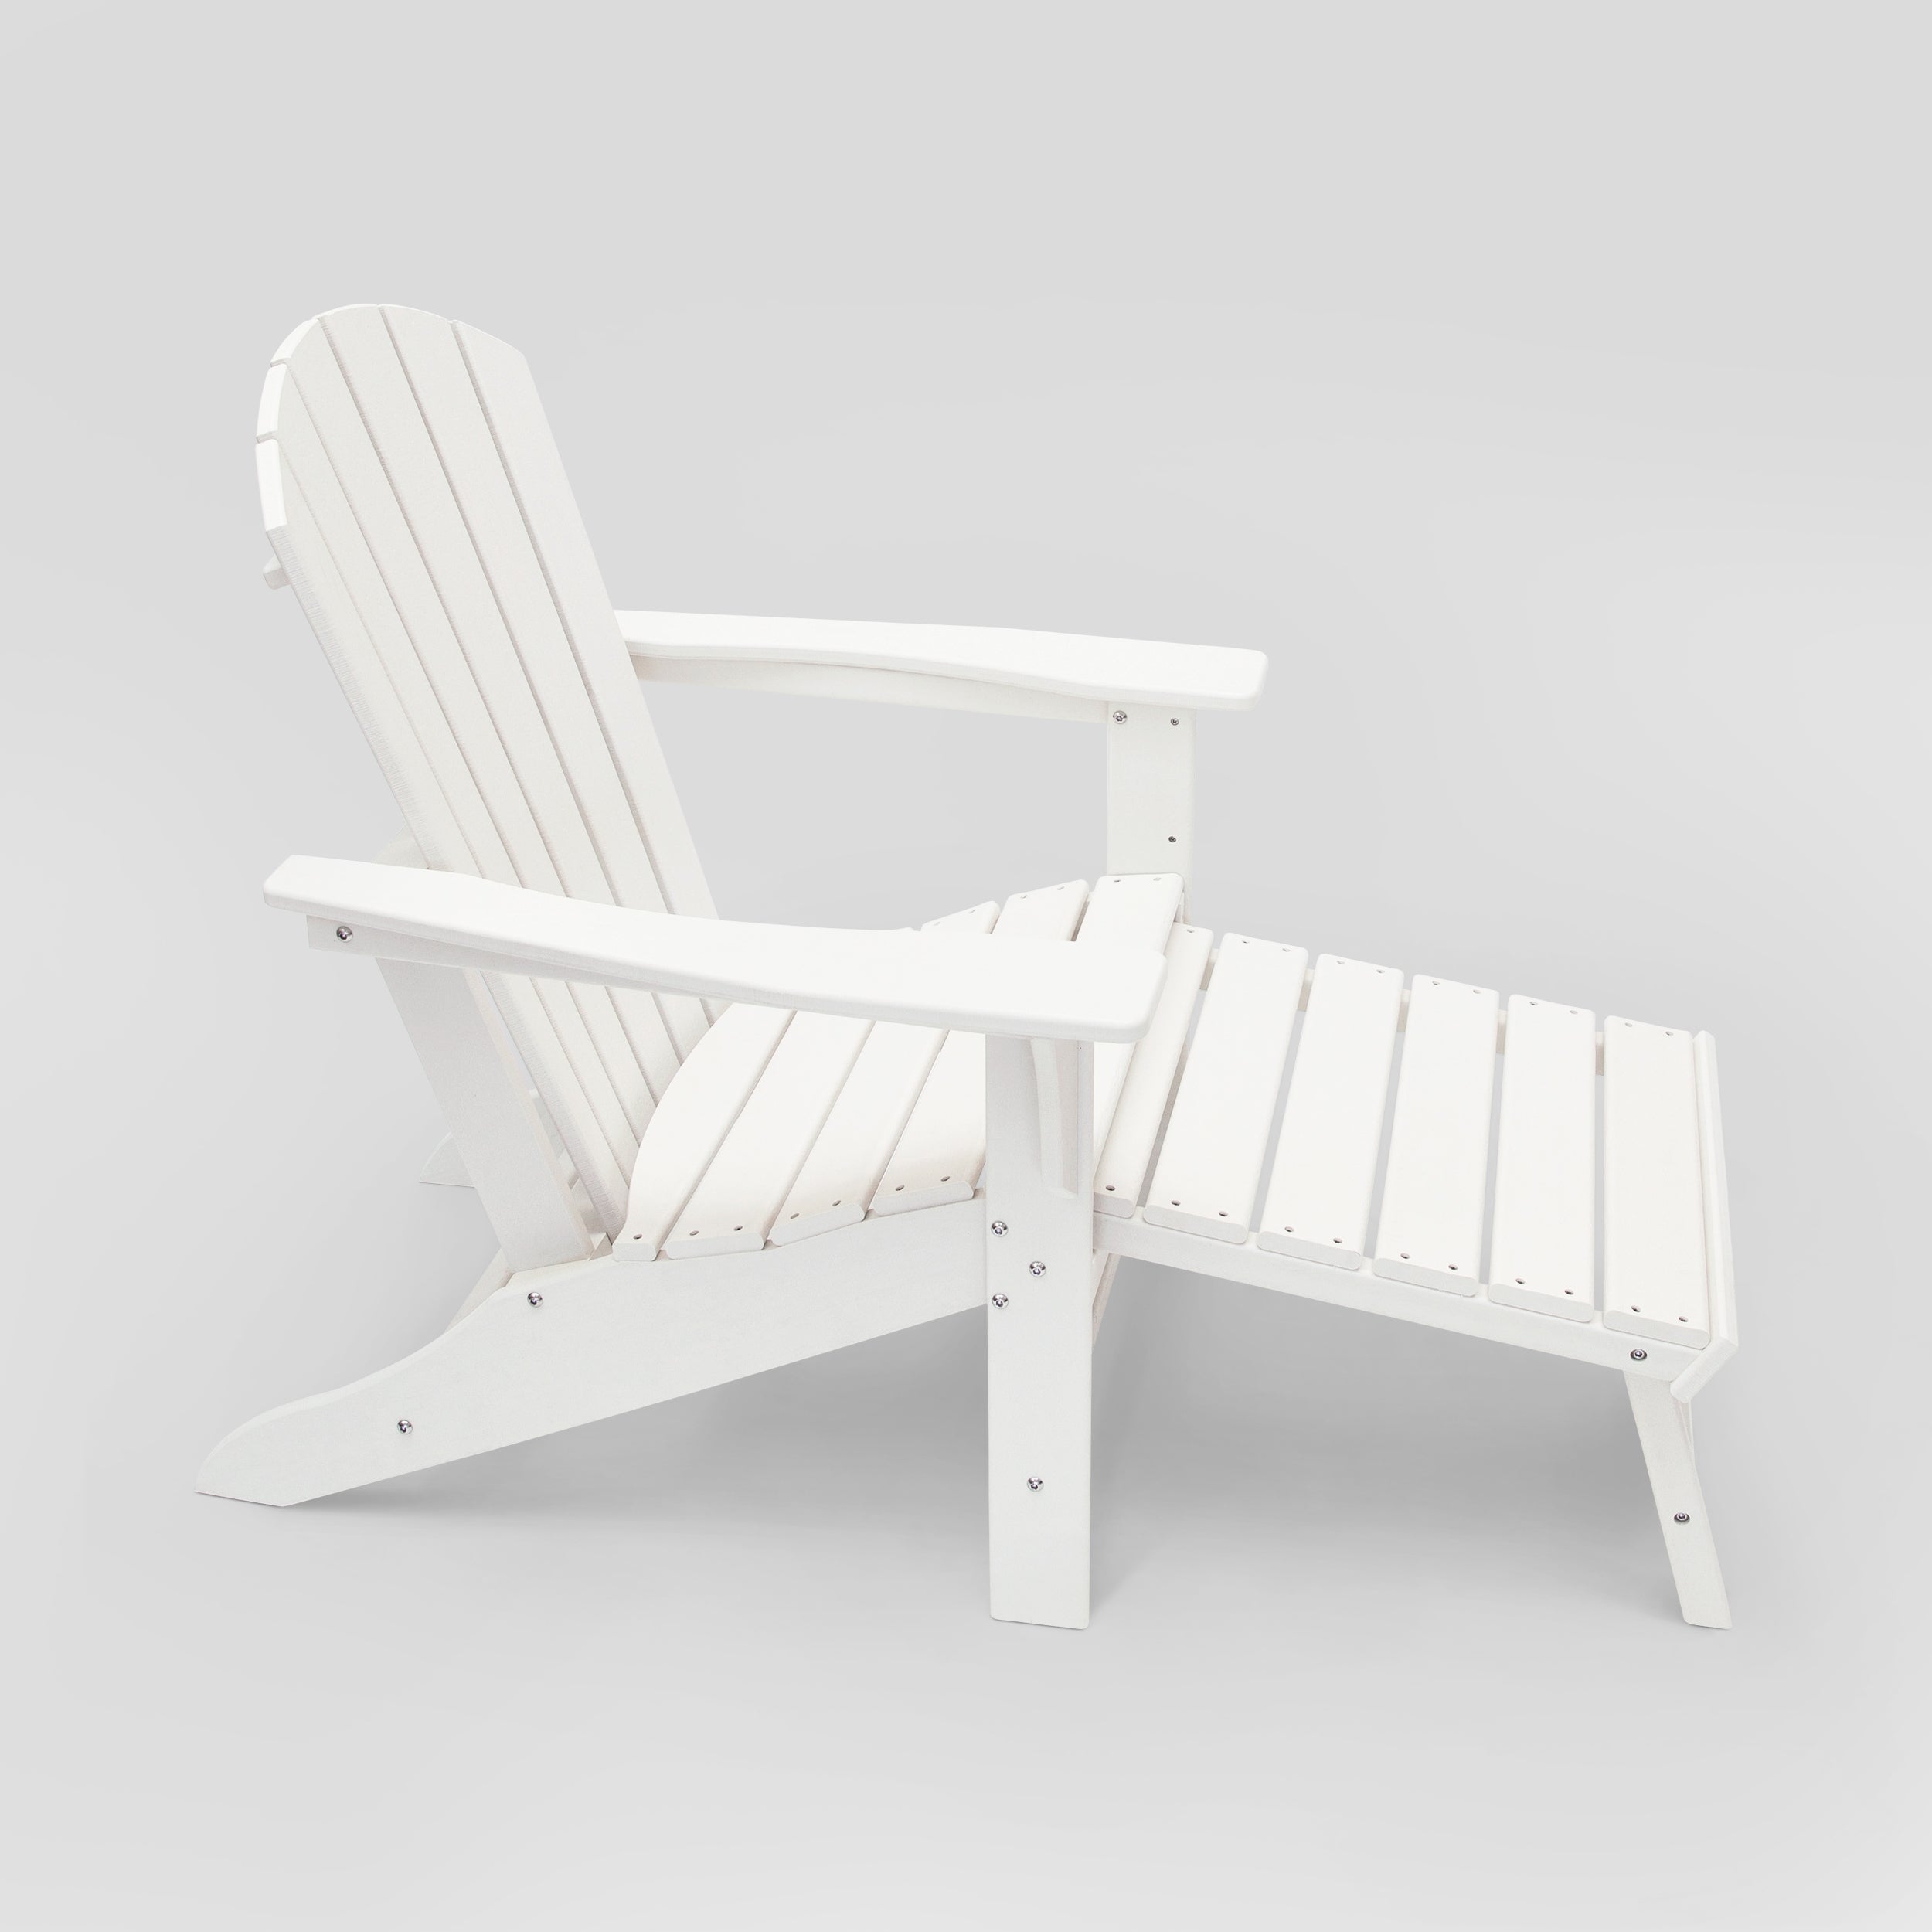 Hampton HDPE Recycled Plastic Outdoor Patio Adirondack Chair with Hideaway Ottoman